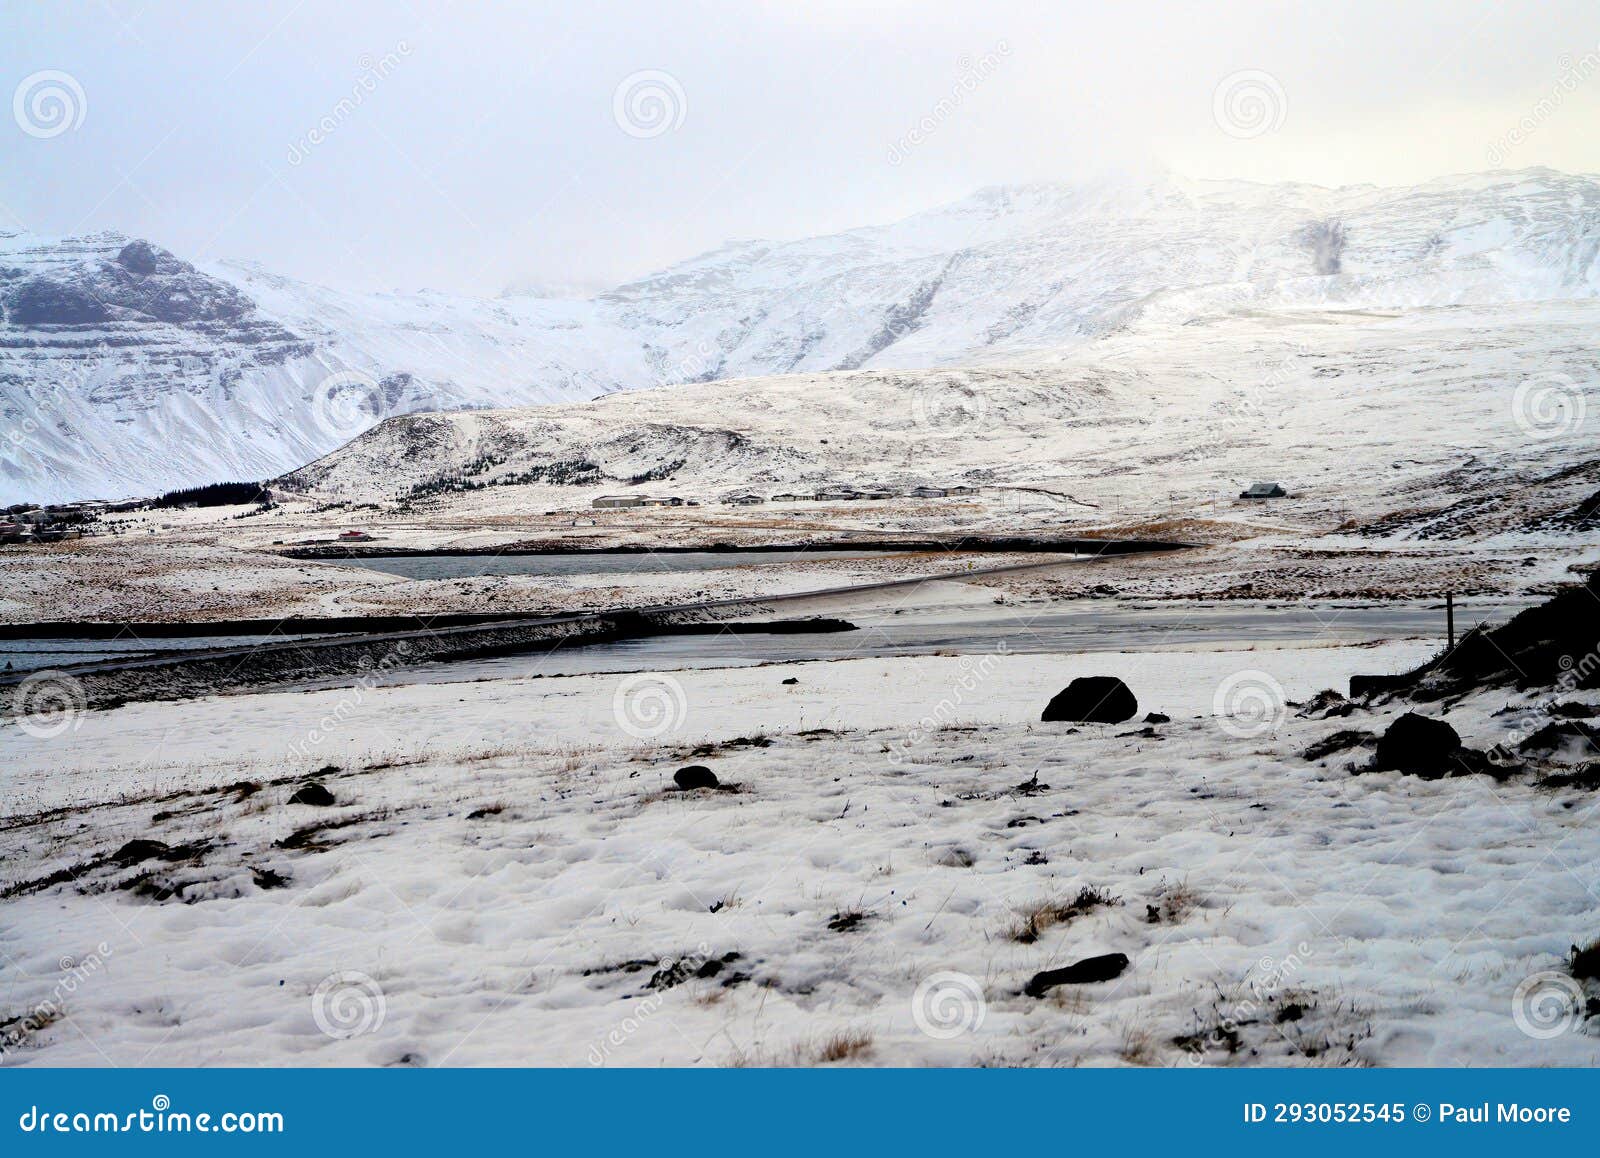 The Snowy Highlands Of Iceland In Winter Stock Image Image Of Snow